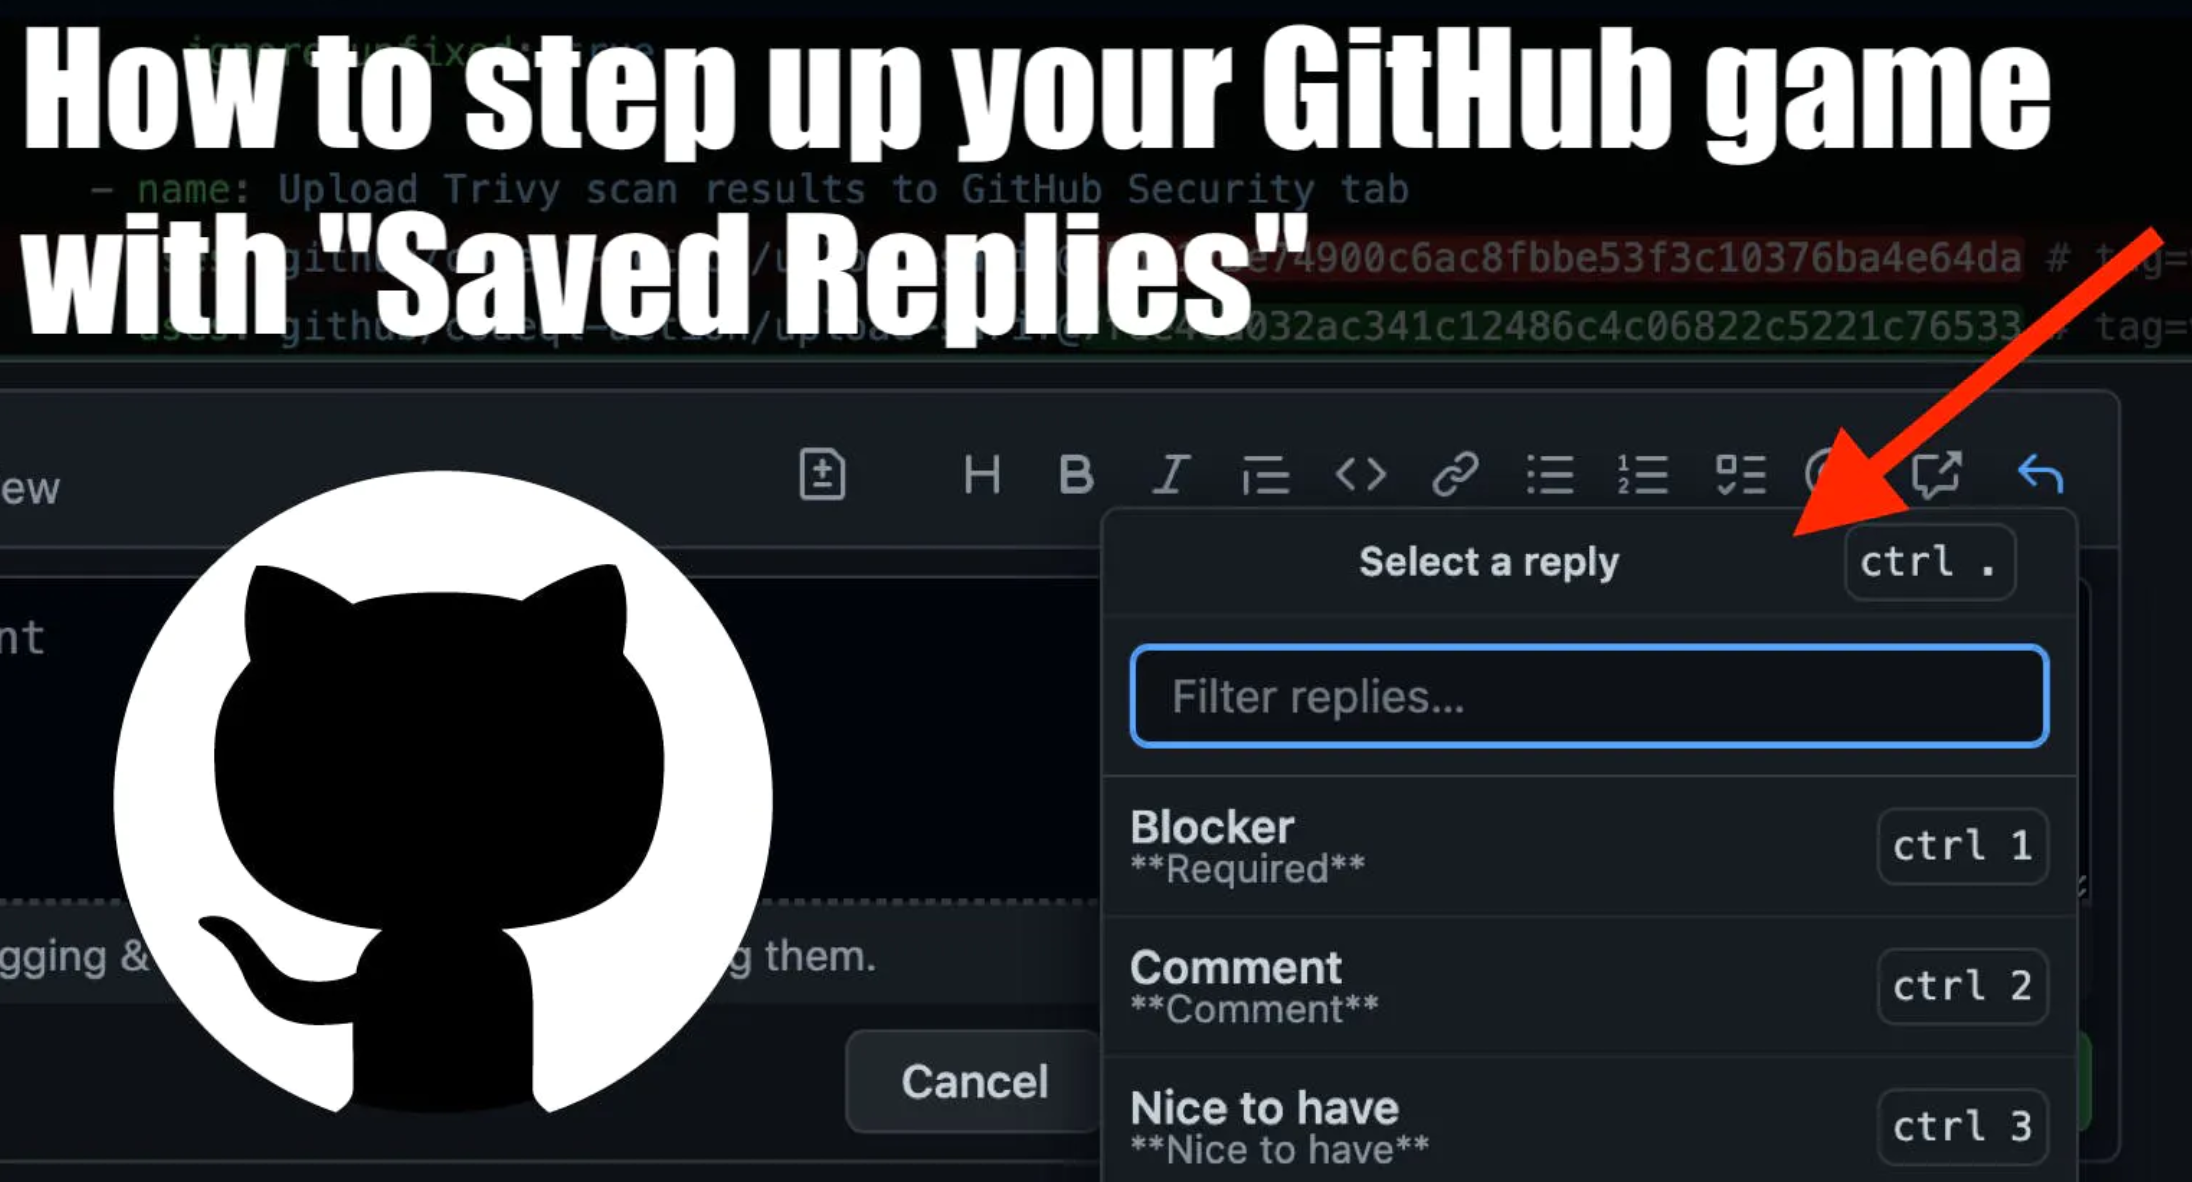 How to step up your GitHub game with "Saved replies"